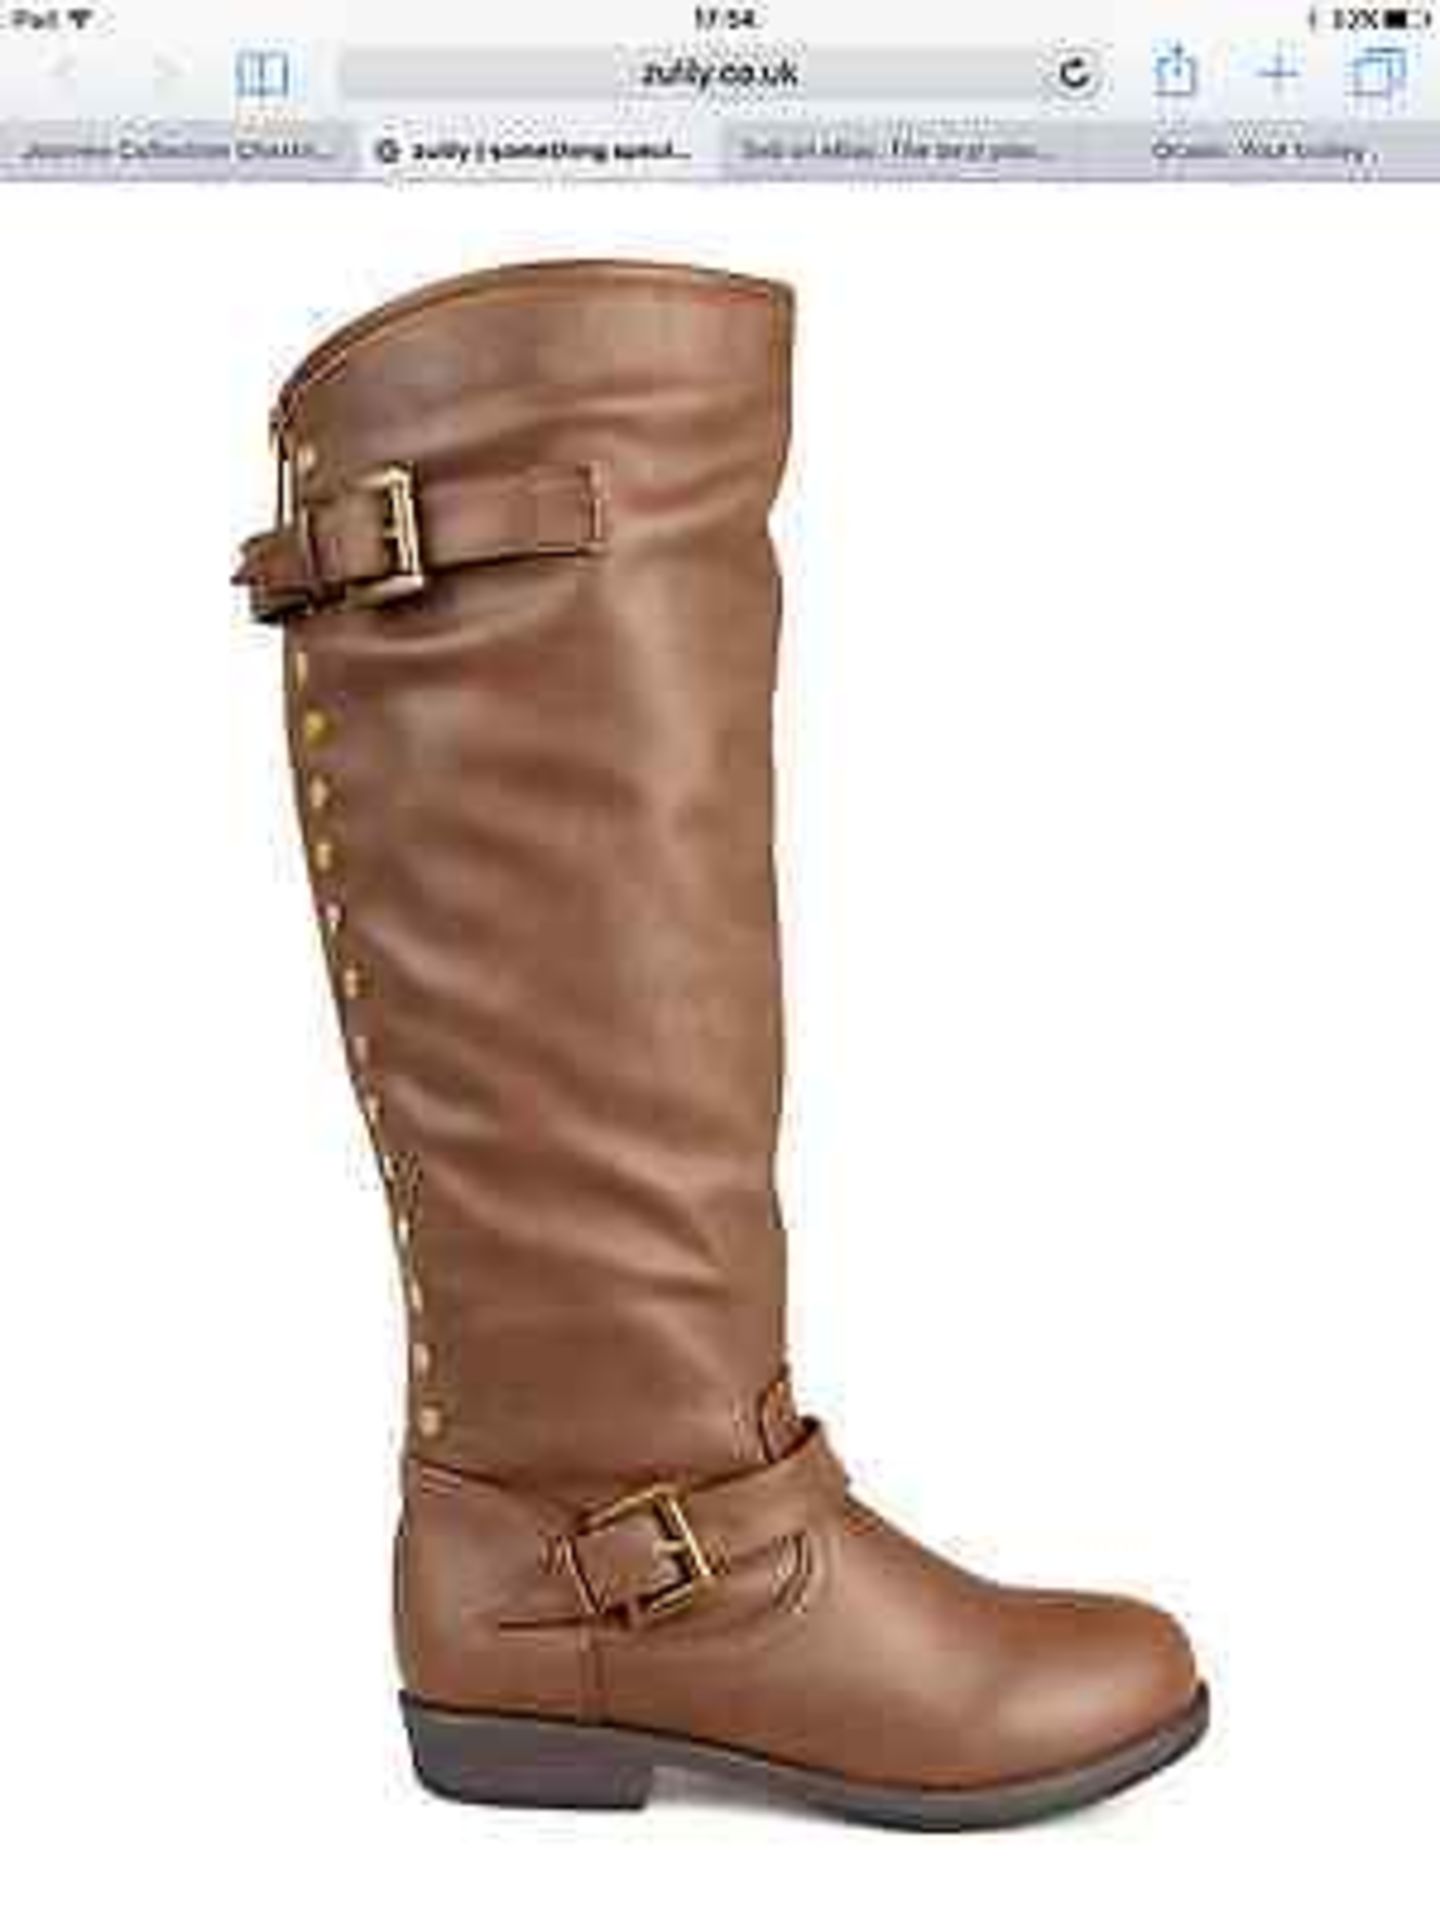 Journee Collection Chestnut Spokane Extra-Wide Calf Boot, Size Eur 39.5 (New with box) - Image 2 of 6